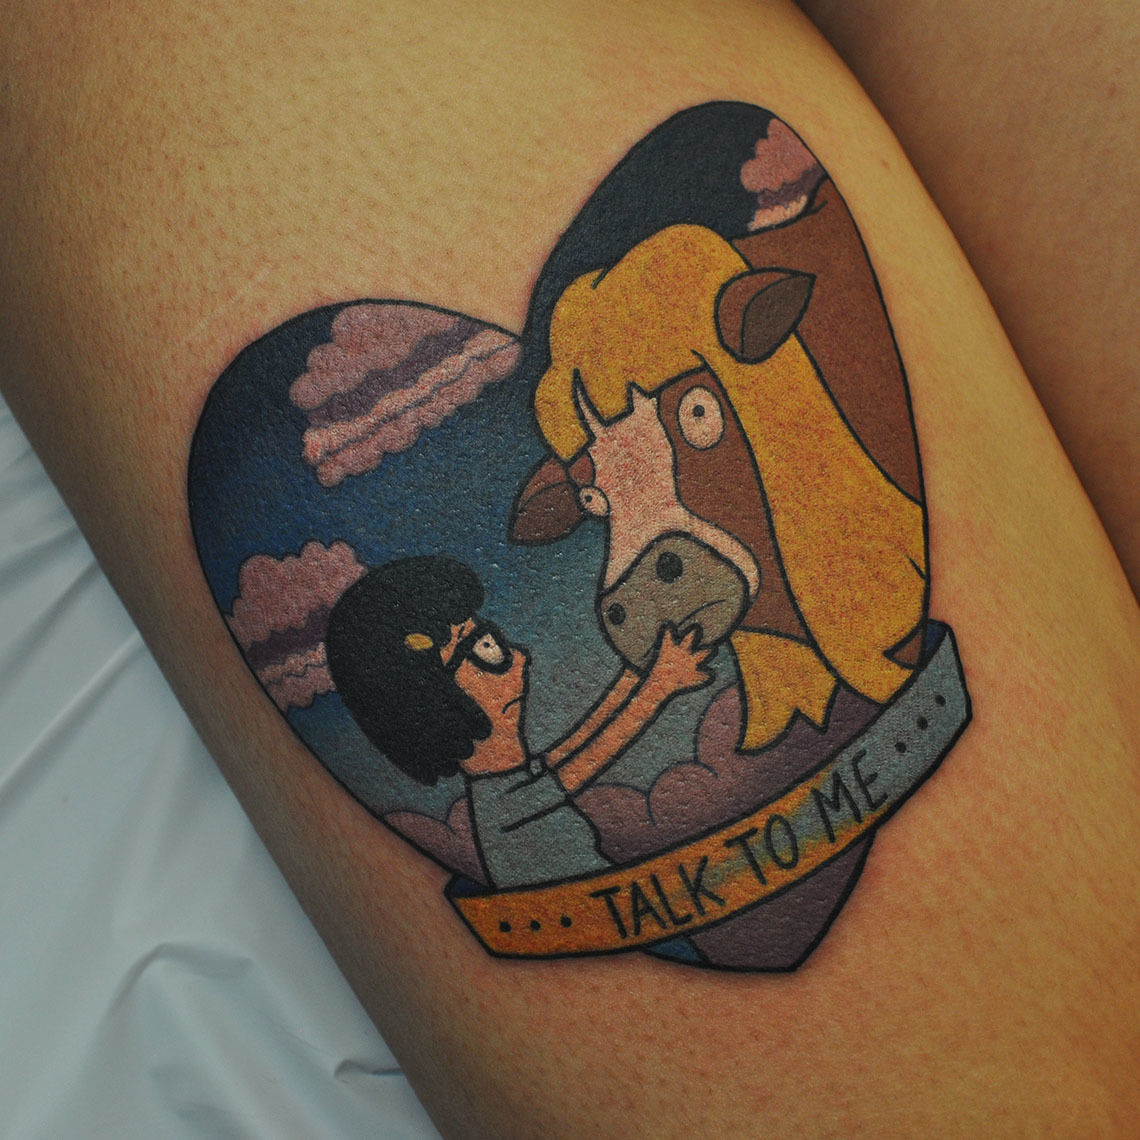 Tattoo tagged with bobs burgers cherry blossom neotrad quote   inkedappcom